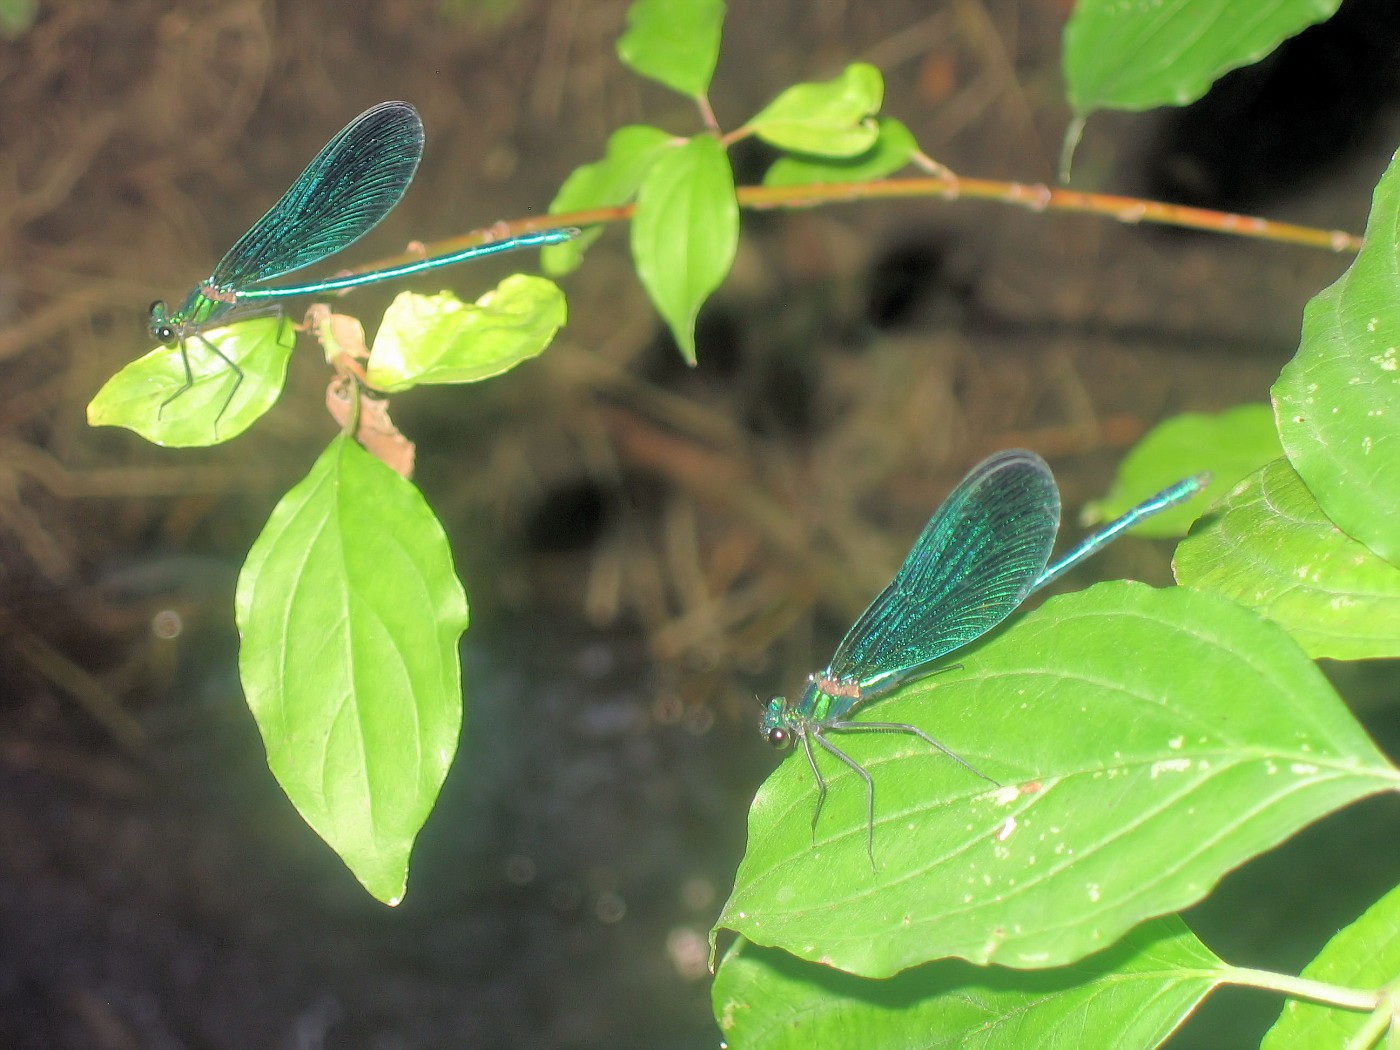 Two Dragonflies #2